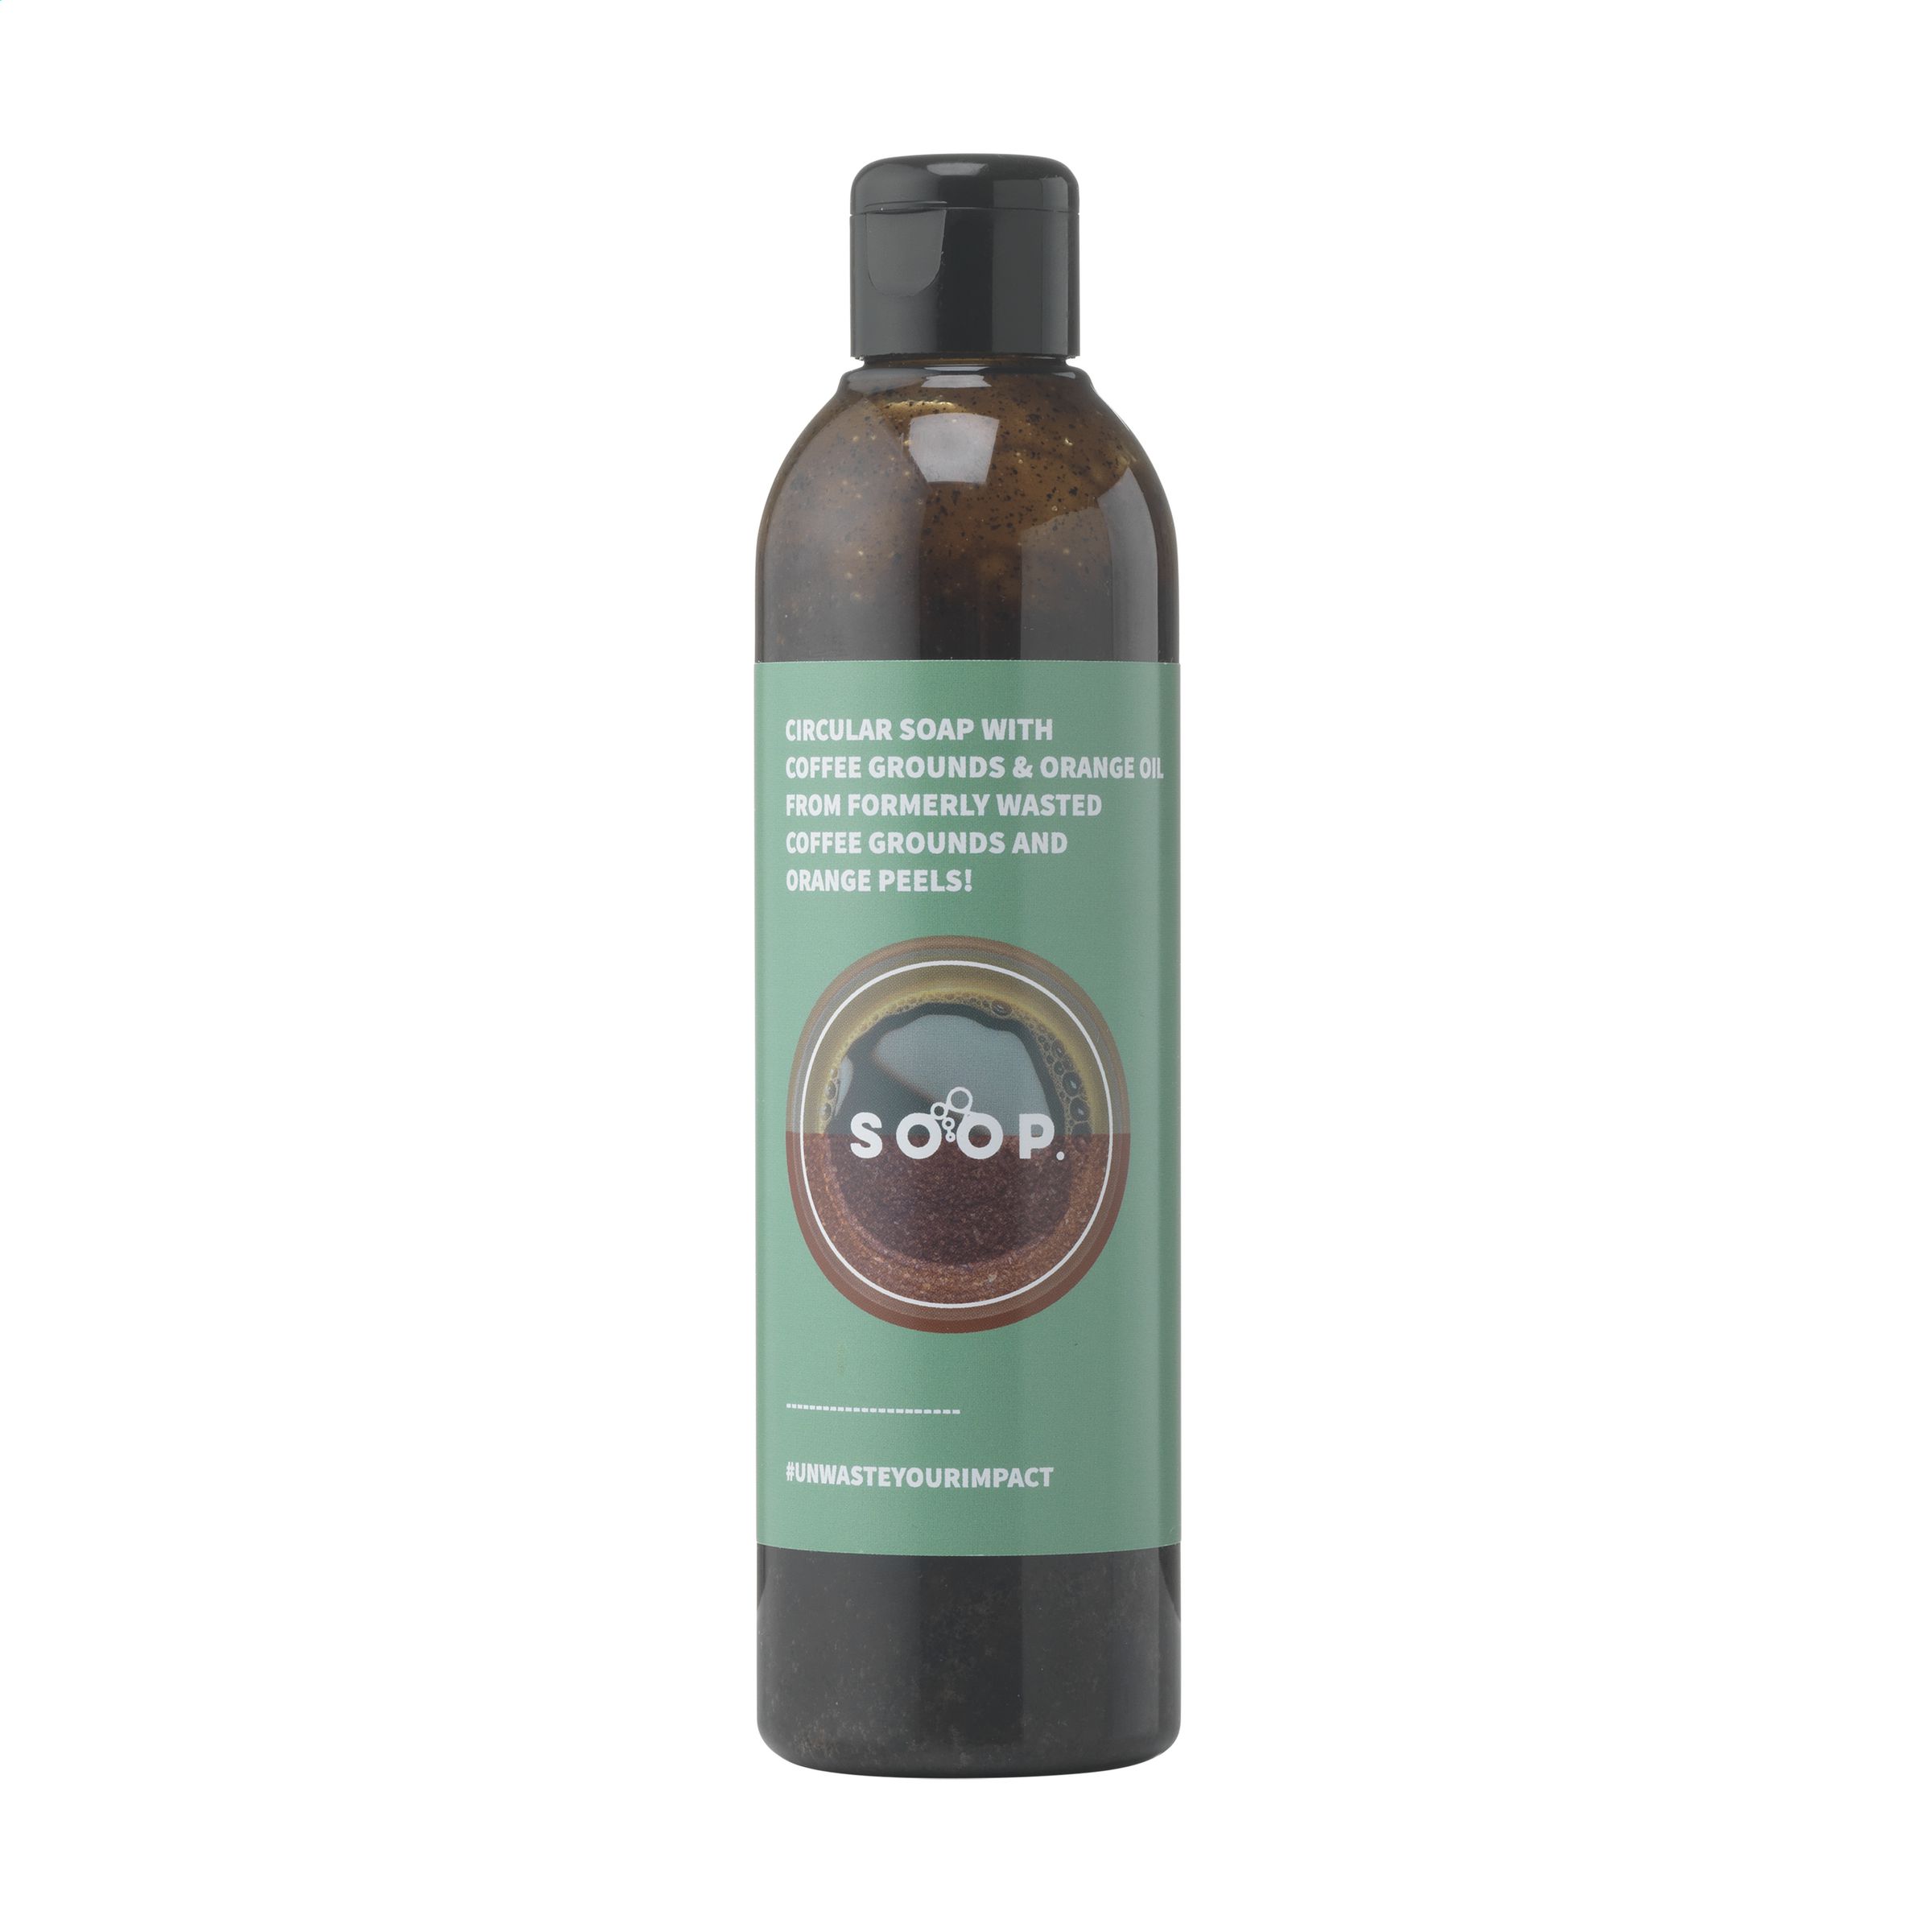 Natural liquid soap made from recycled coffee grounds and orange peels - Poole